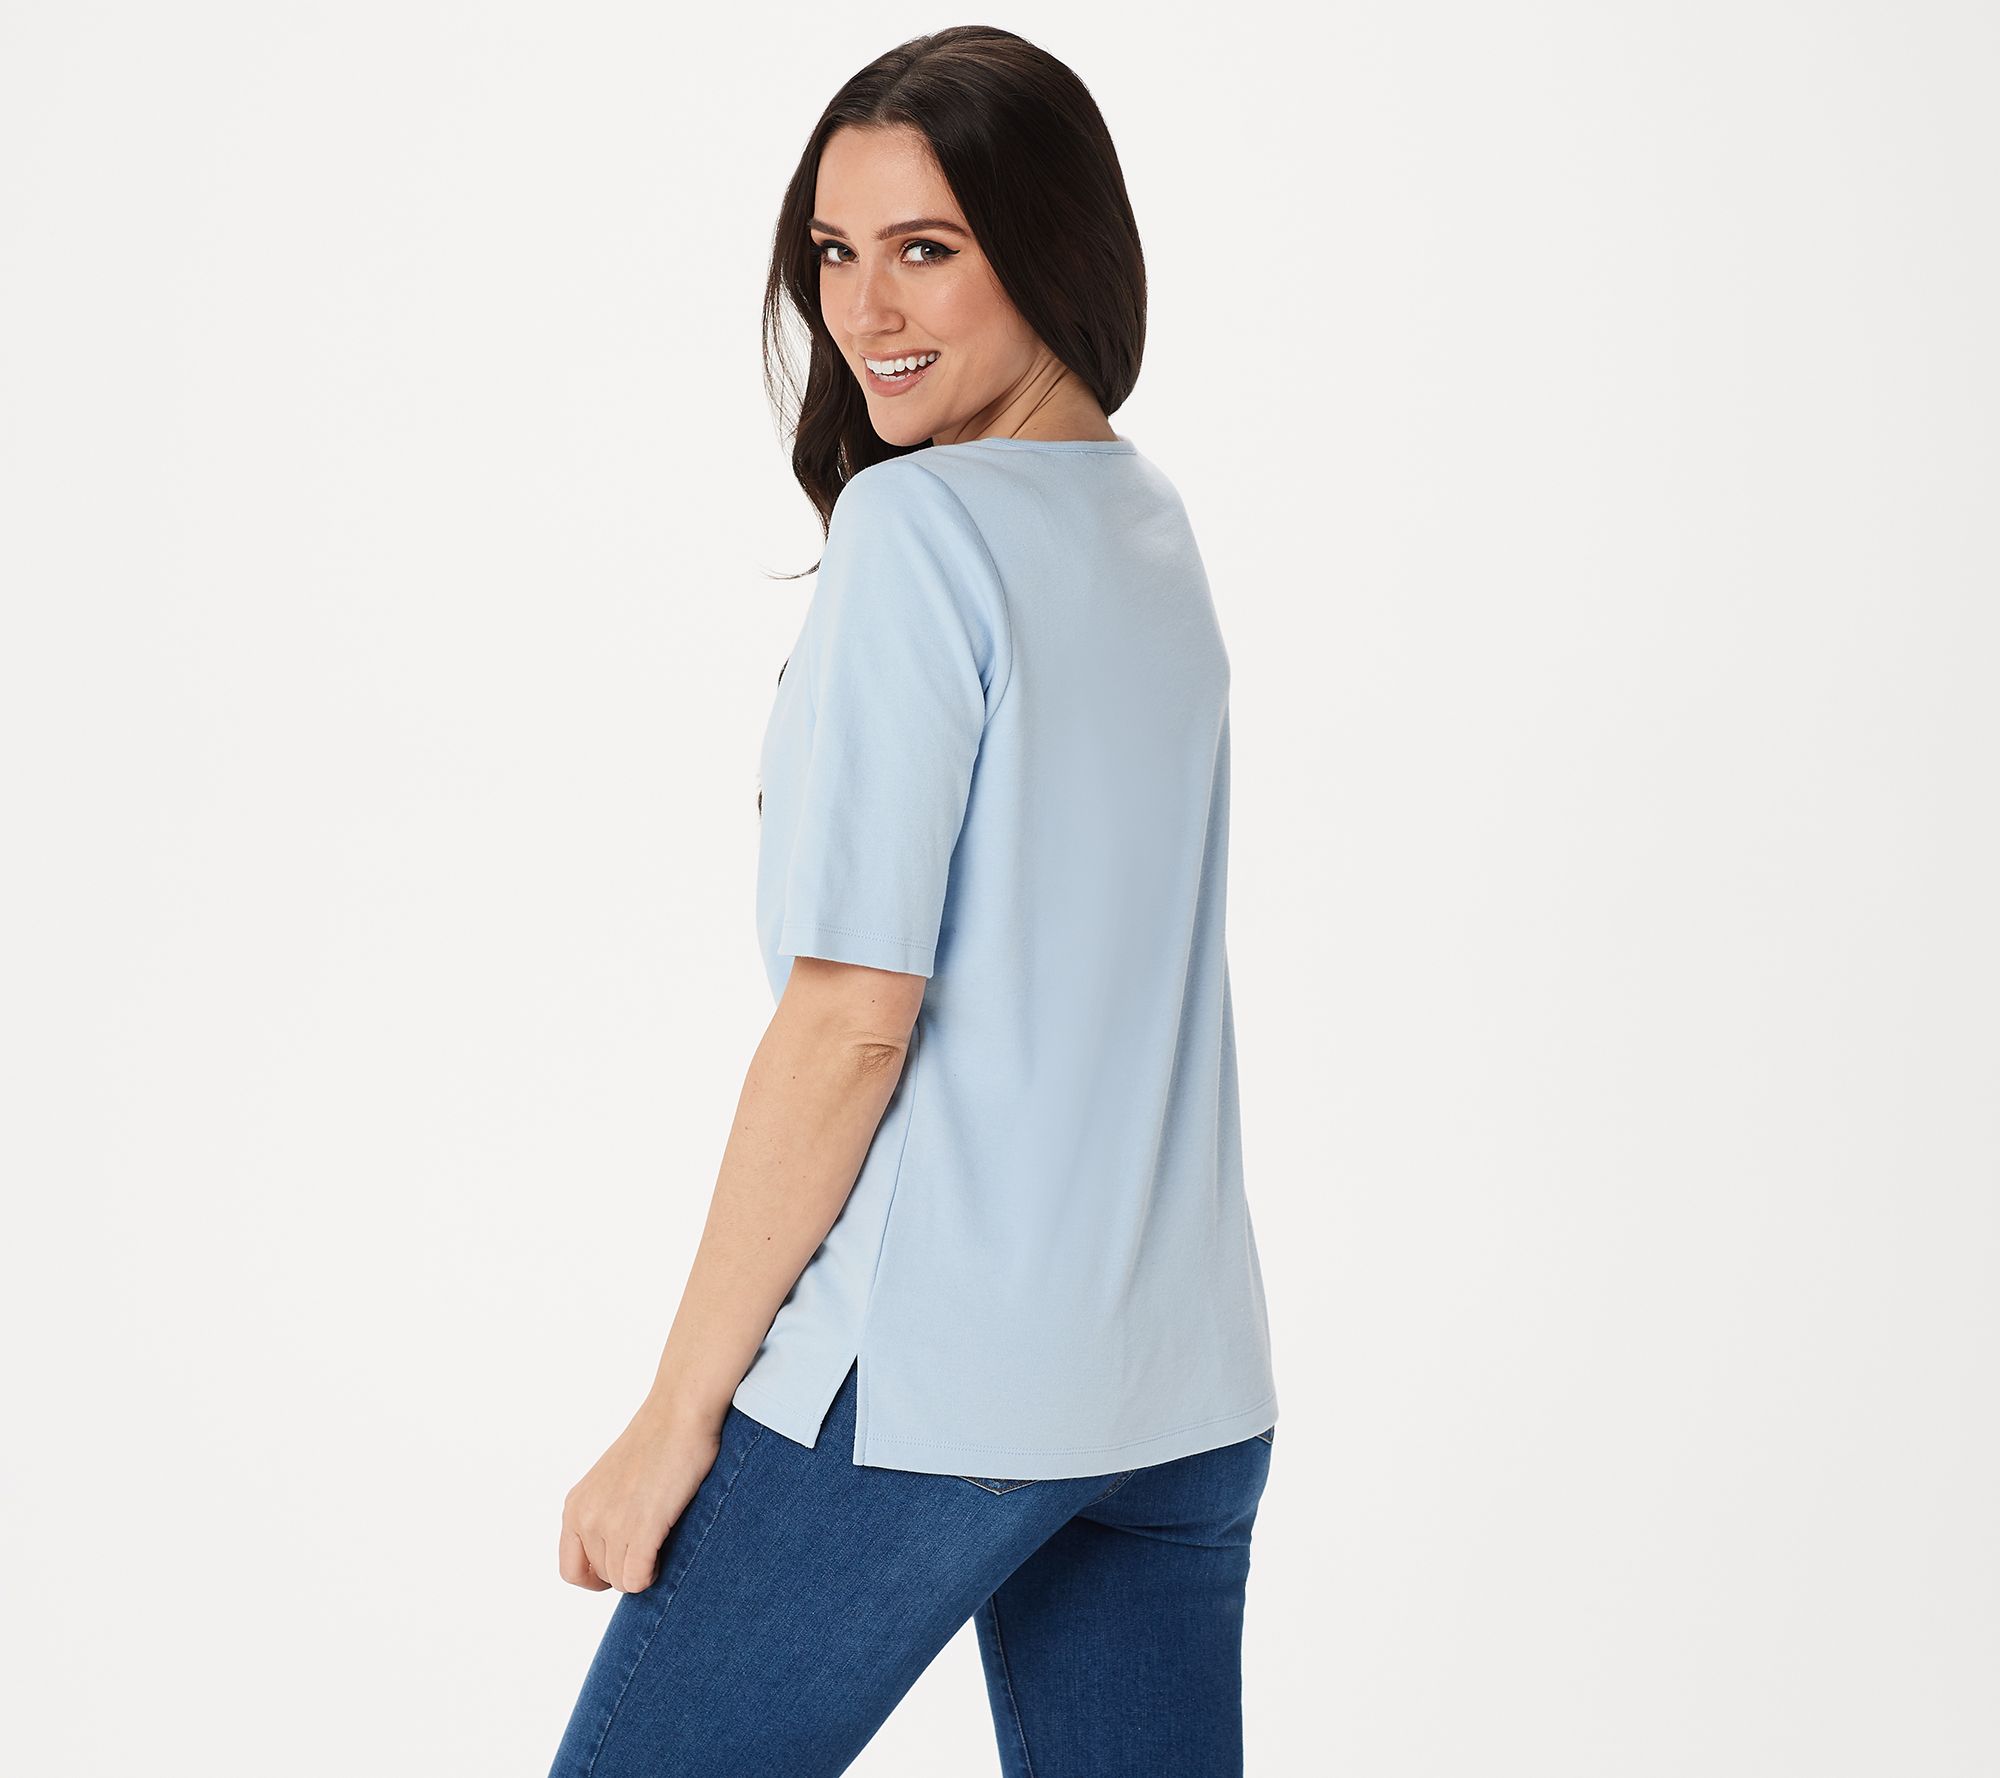 Quacker Factory Elbow-Sleeve Knit Top with Grommet Detail - QVC.com